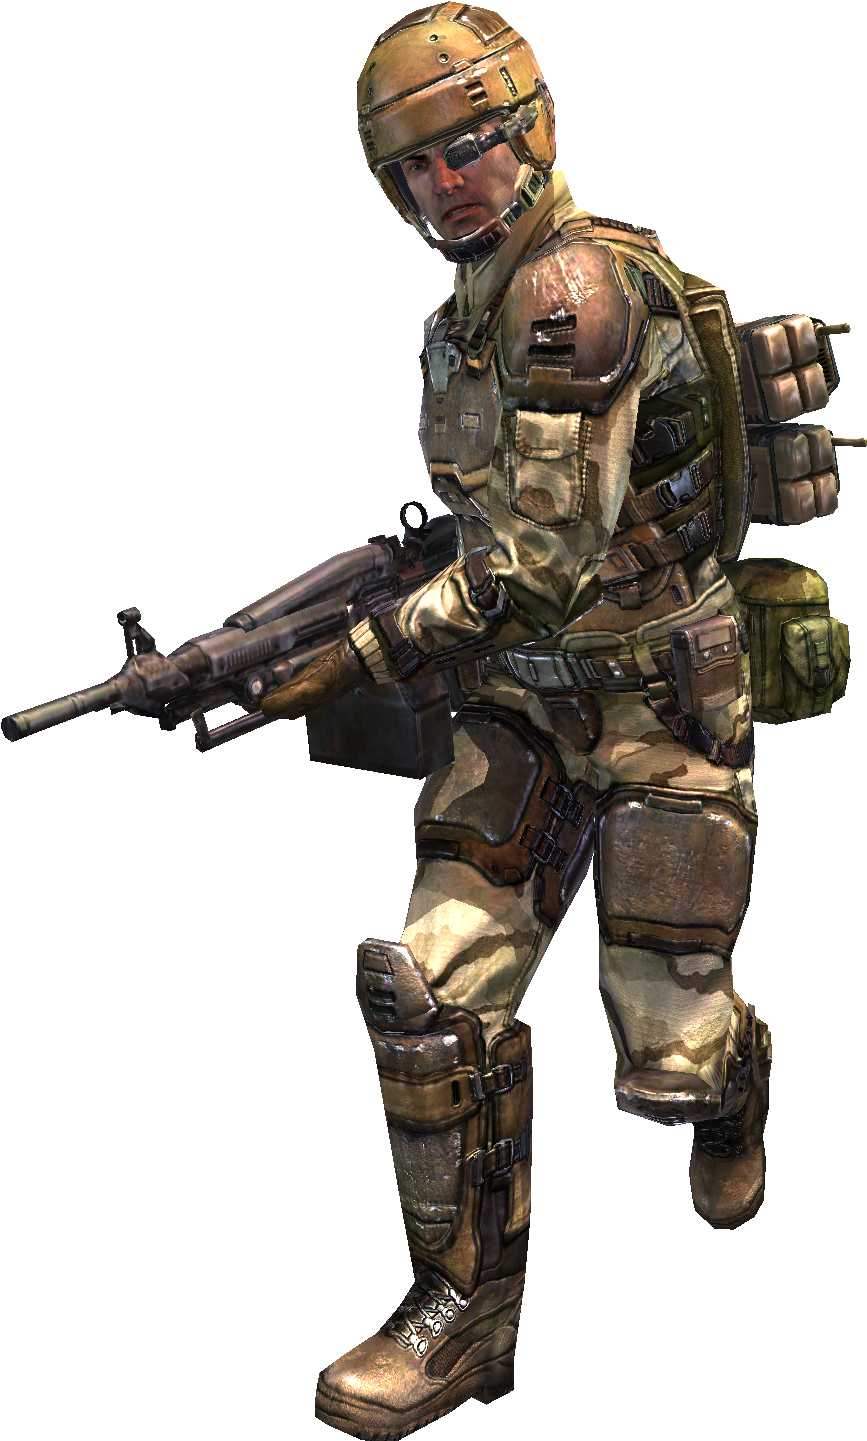 A Man In Camouflage With A Gun